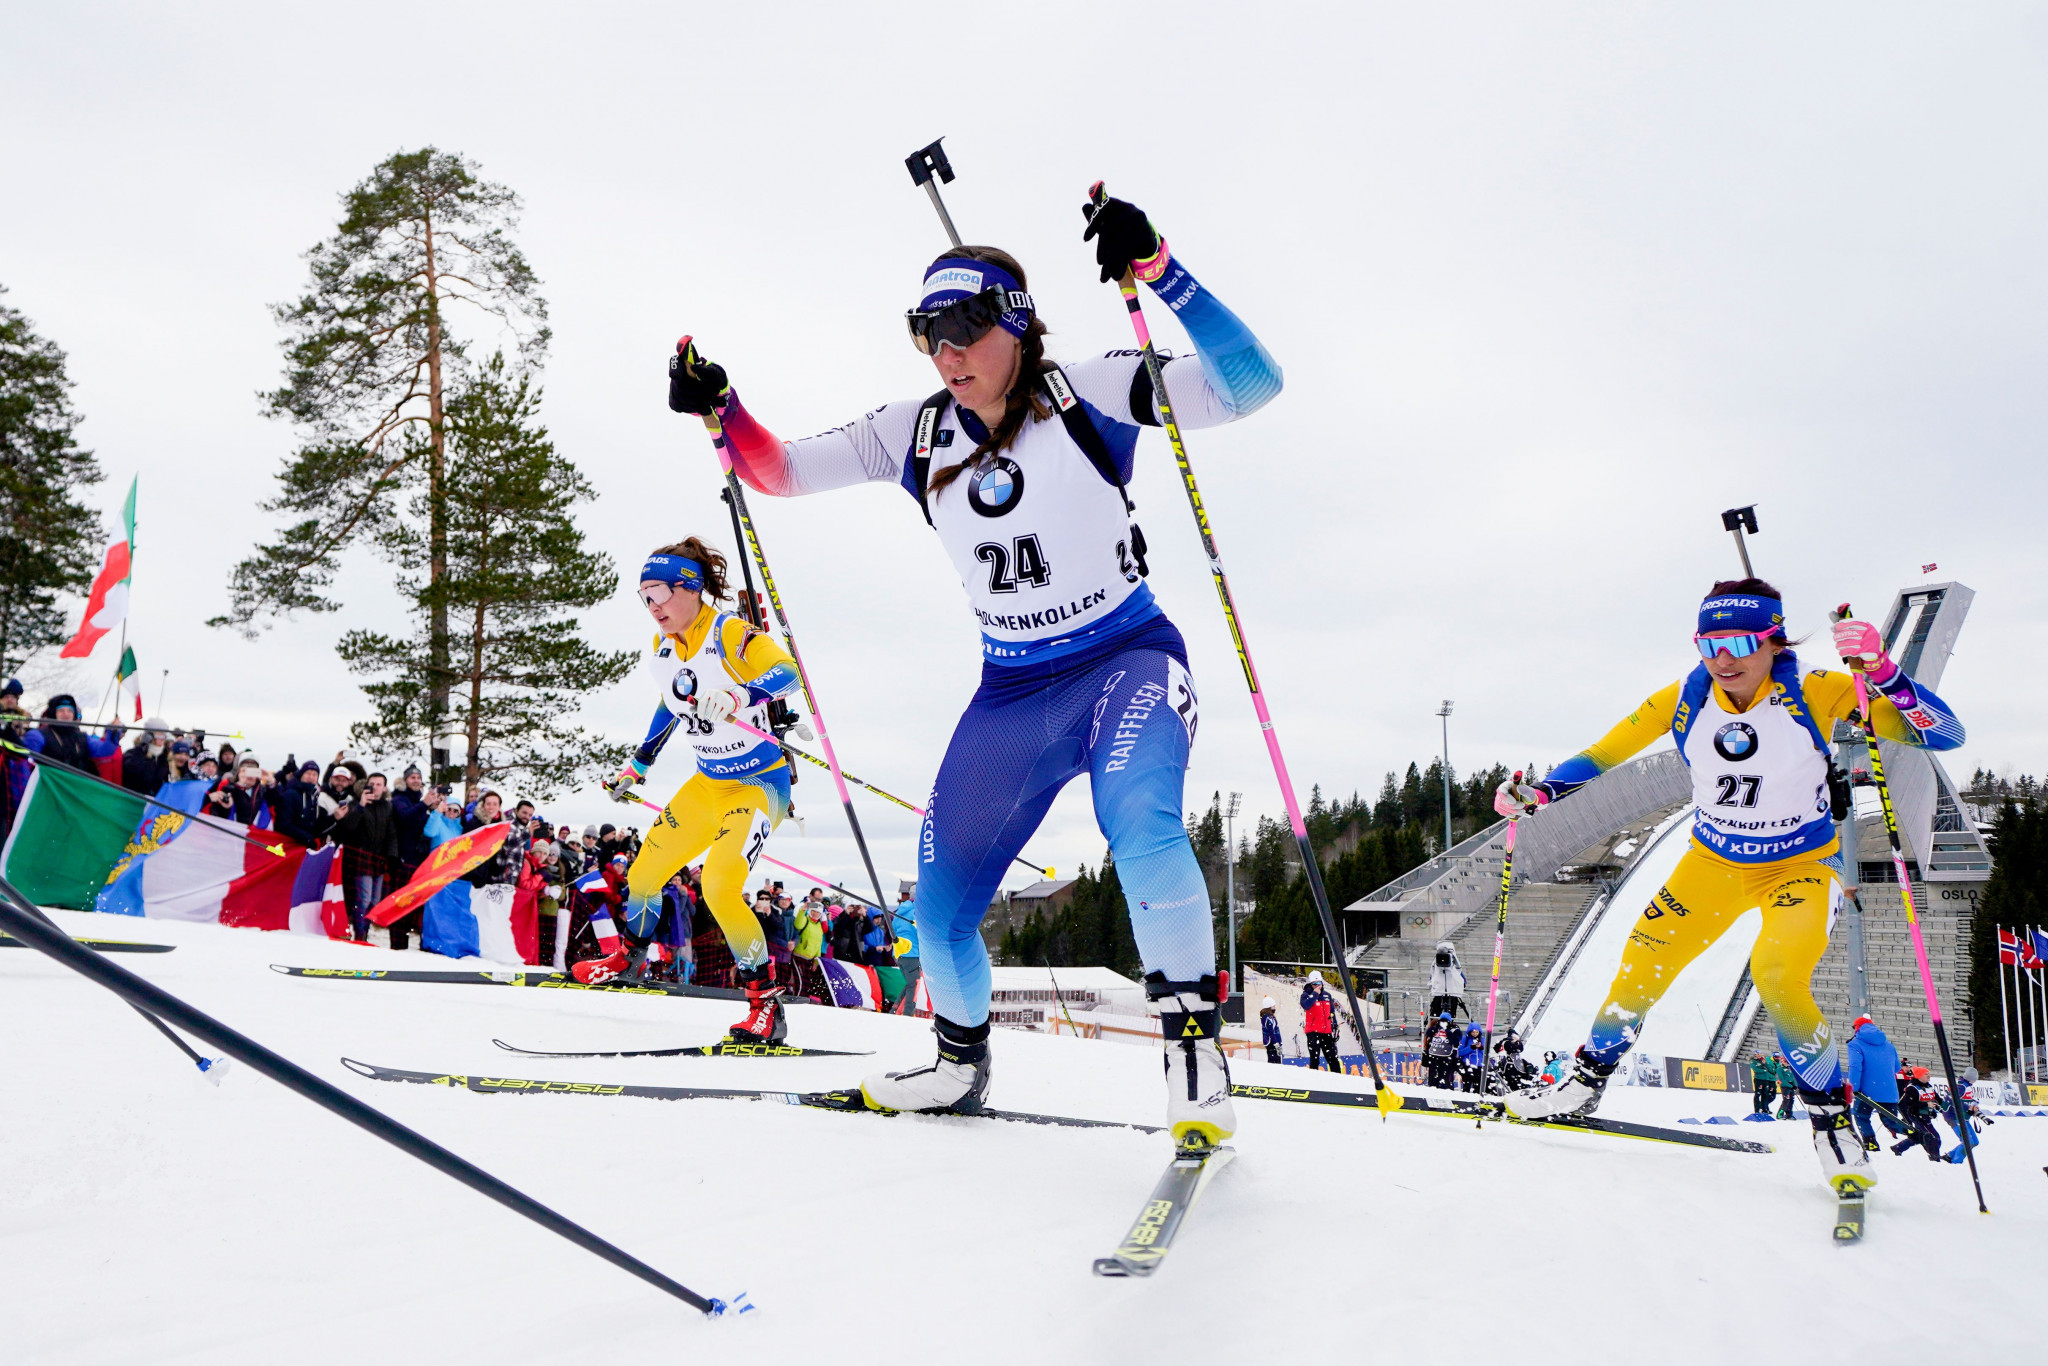 Biathlon is the latest sport to partner with the Olympic Channel ©Getty Images